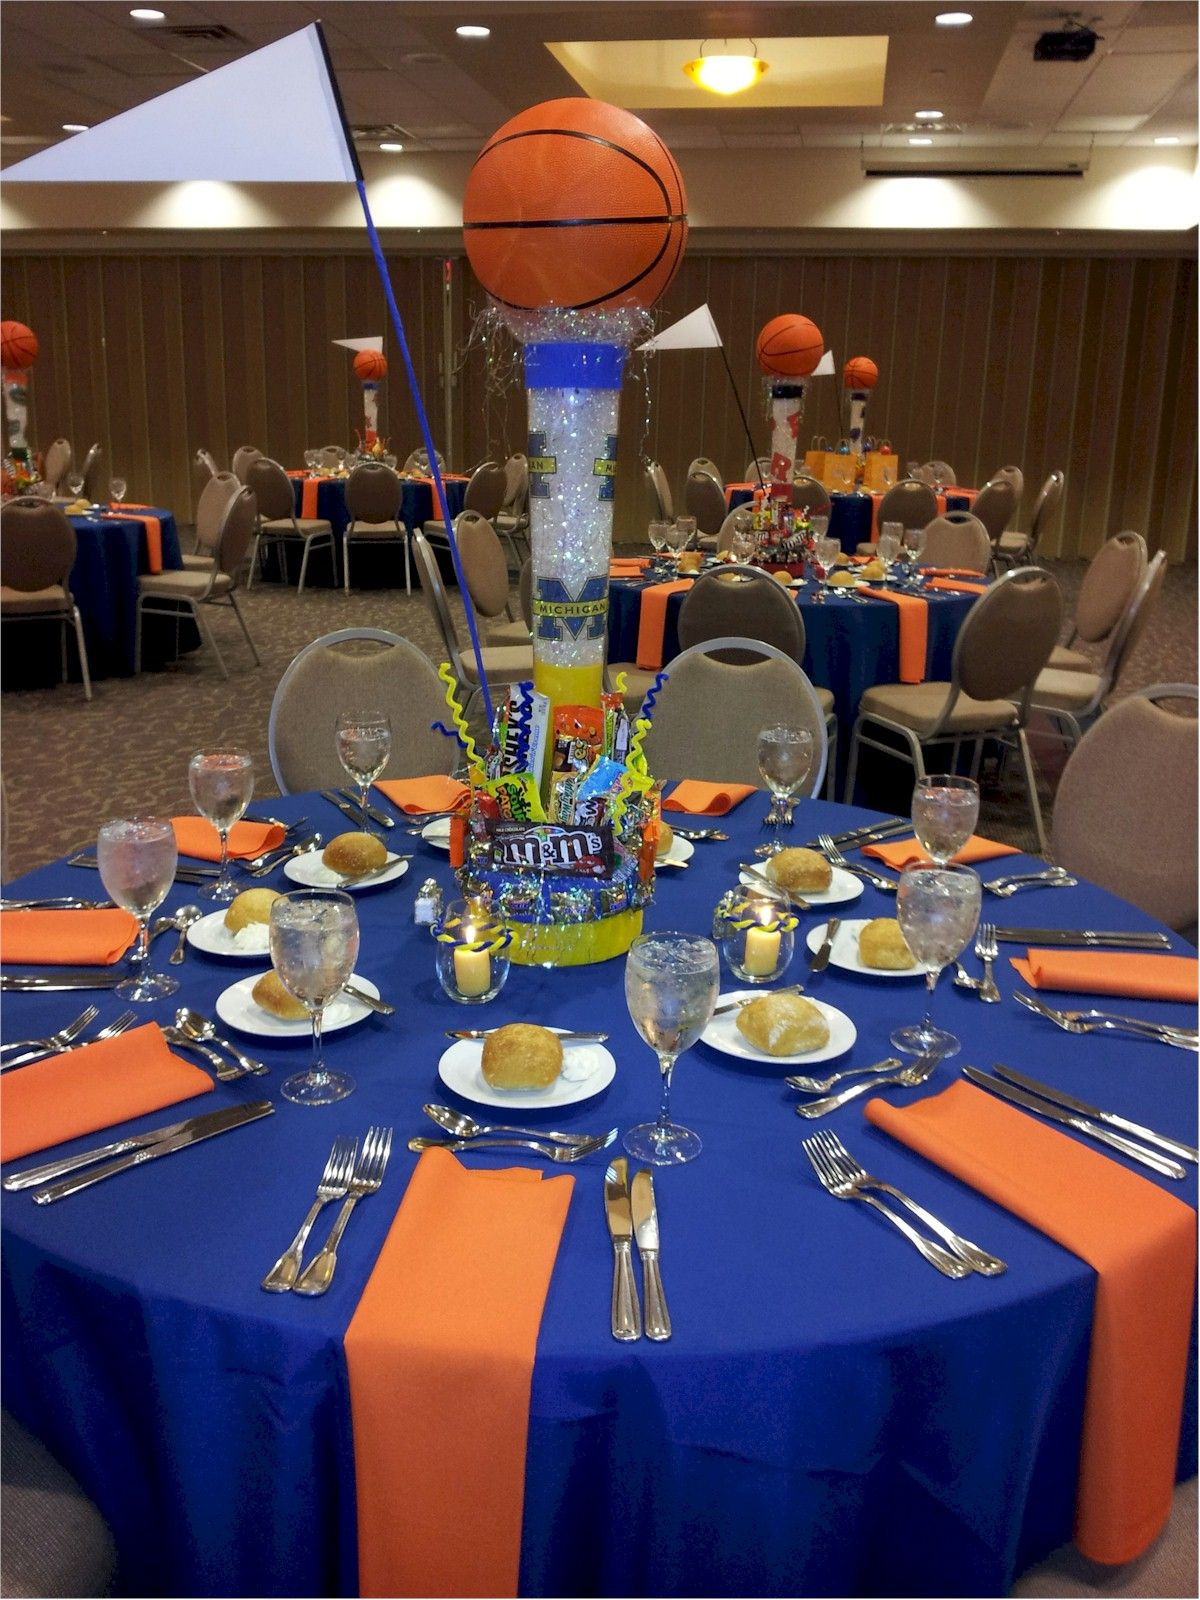 Sports Themed Graduation Party Ideas
 Idea of how to set up table cloths for both grad party or